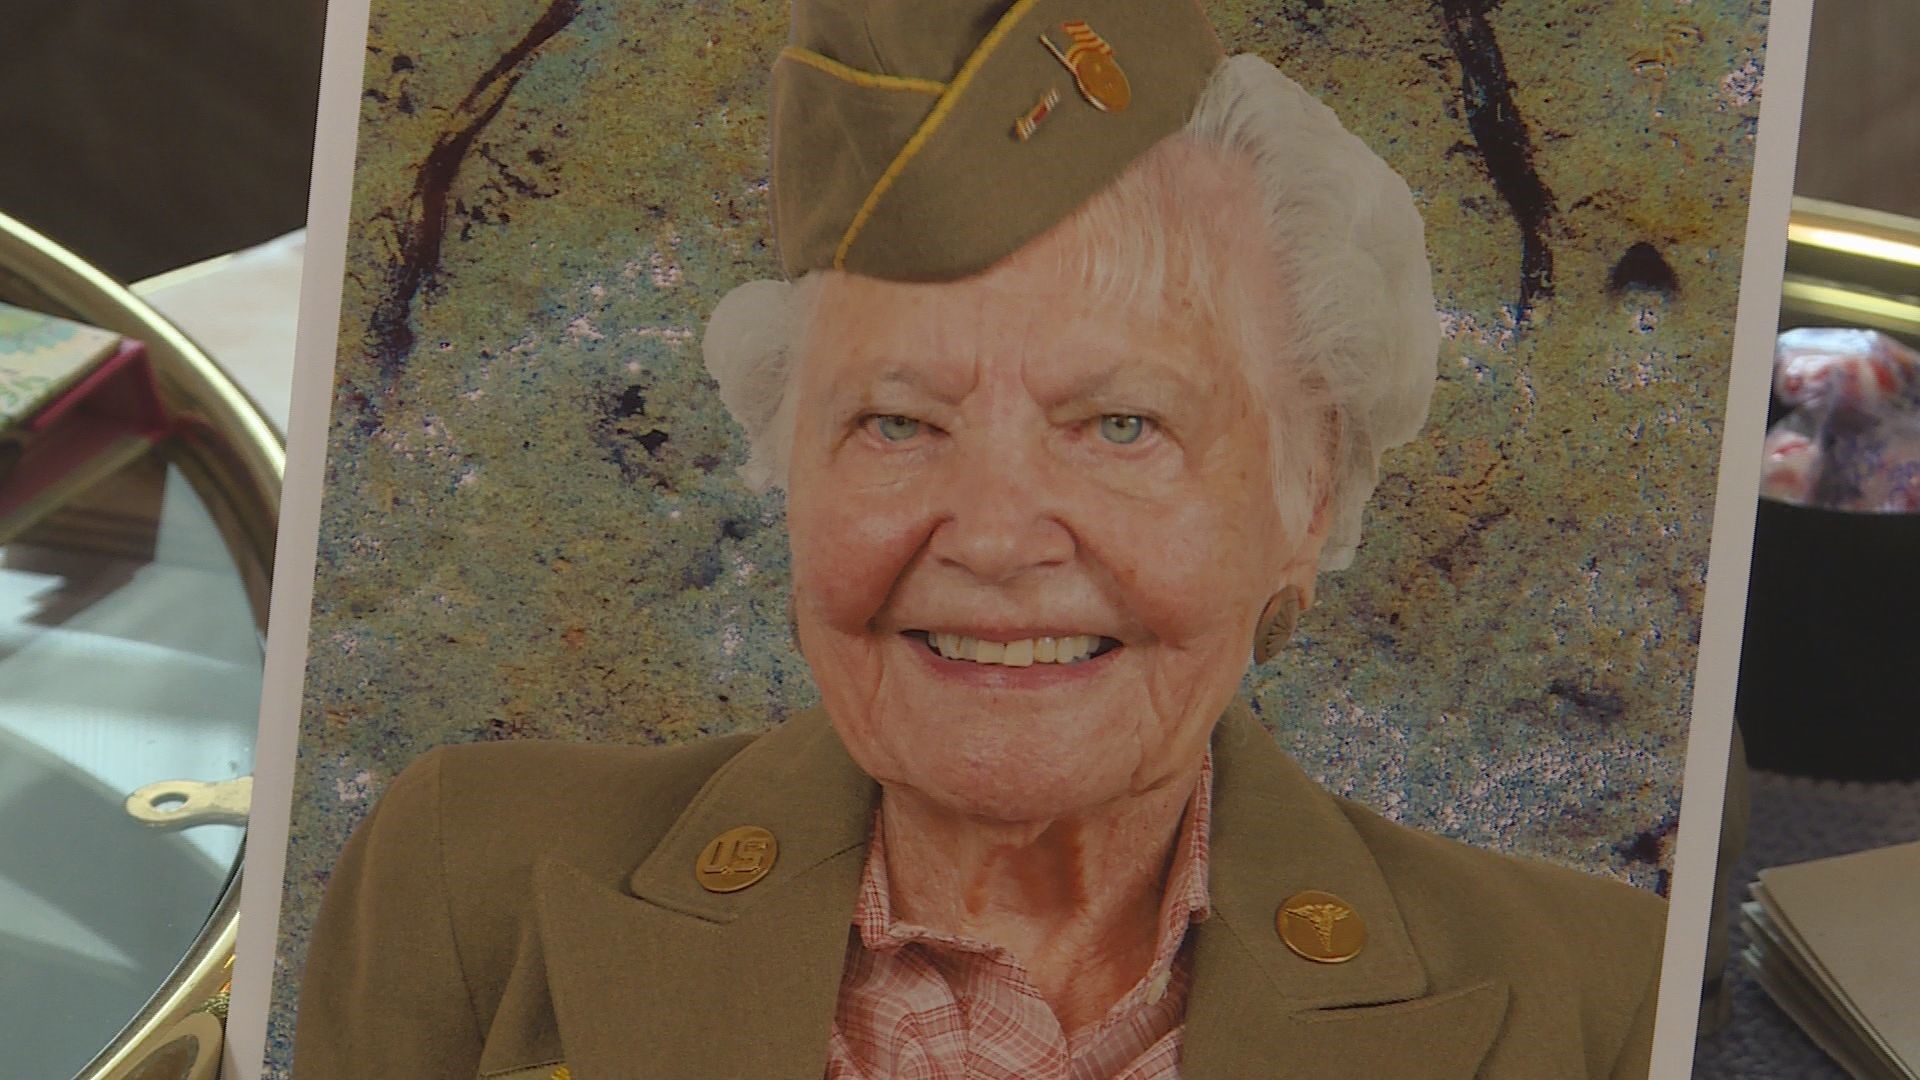 In 100 years of life, Virginia “Ginny” Davis has seen and done a lot, including serving during World War II with the Women’s Army Corps. She was stationed in Cairo.